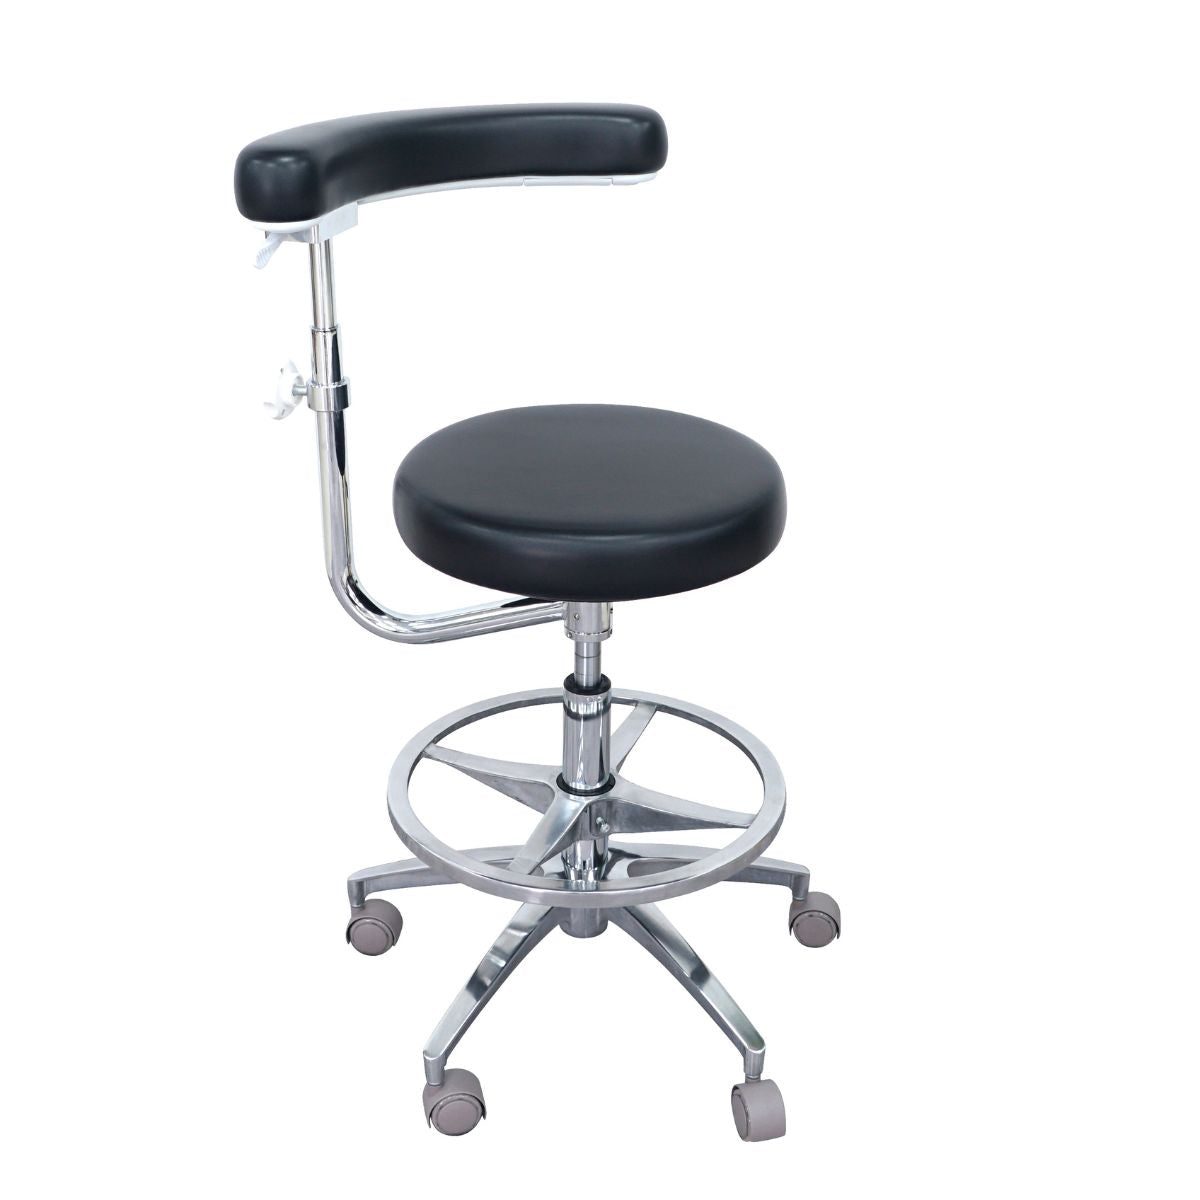 Ergonomic Dental Stools and Chairs with Armrests - ASI Dental